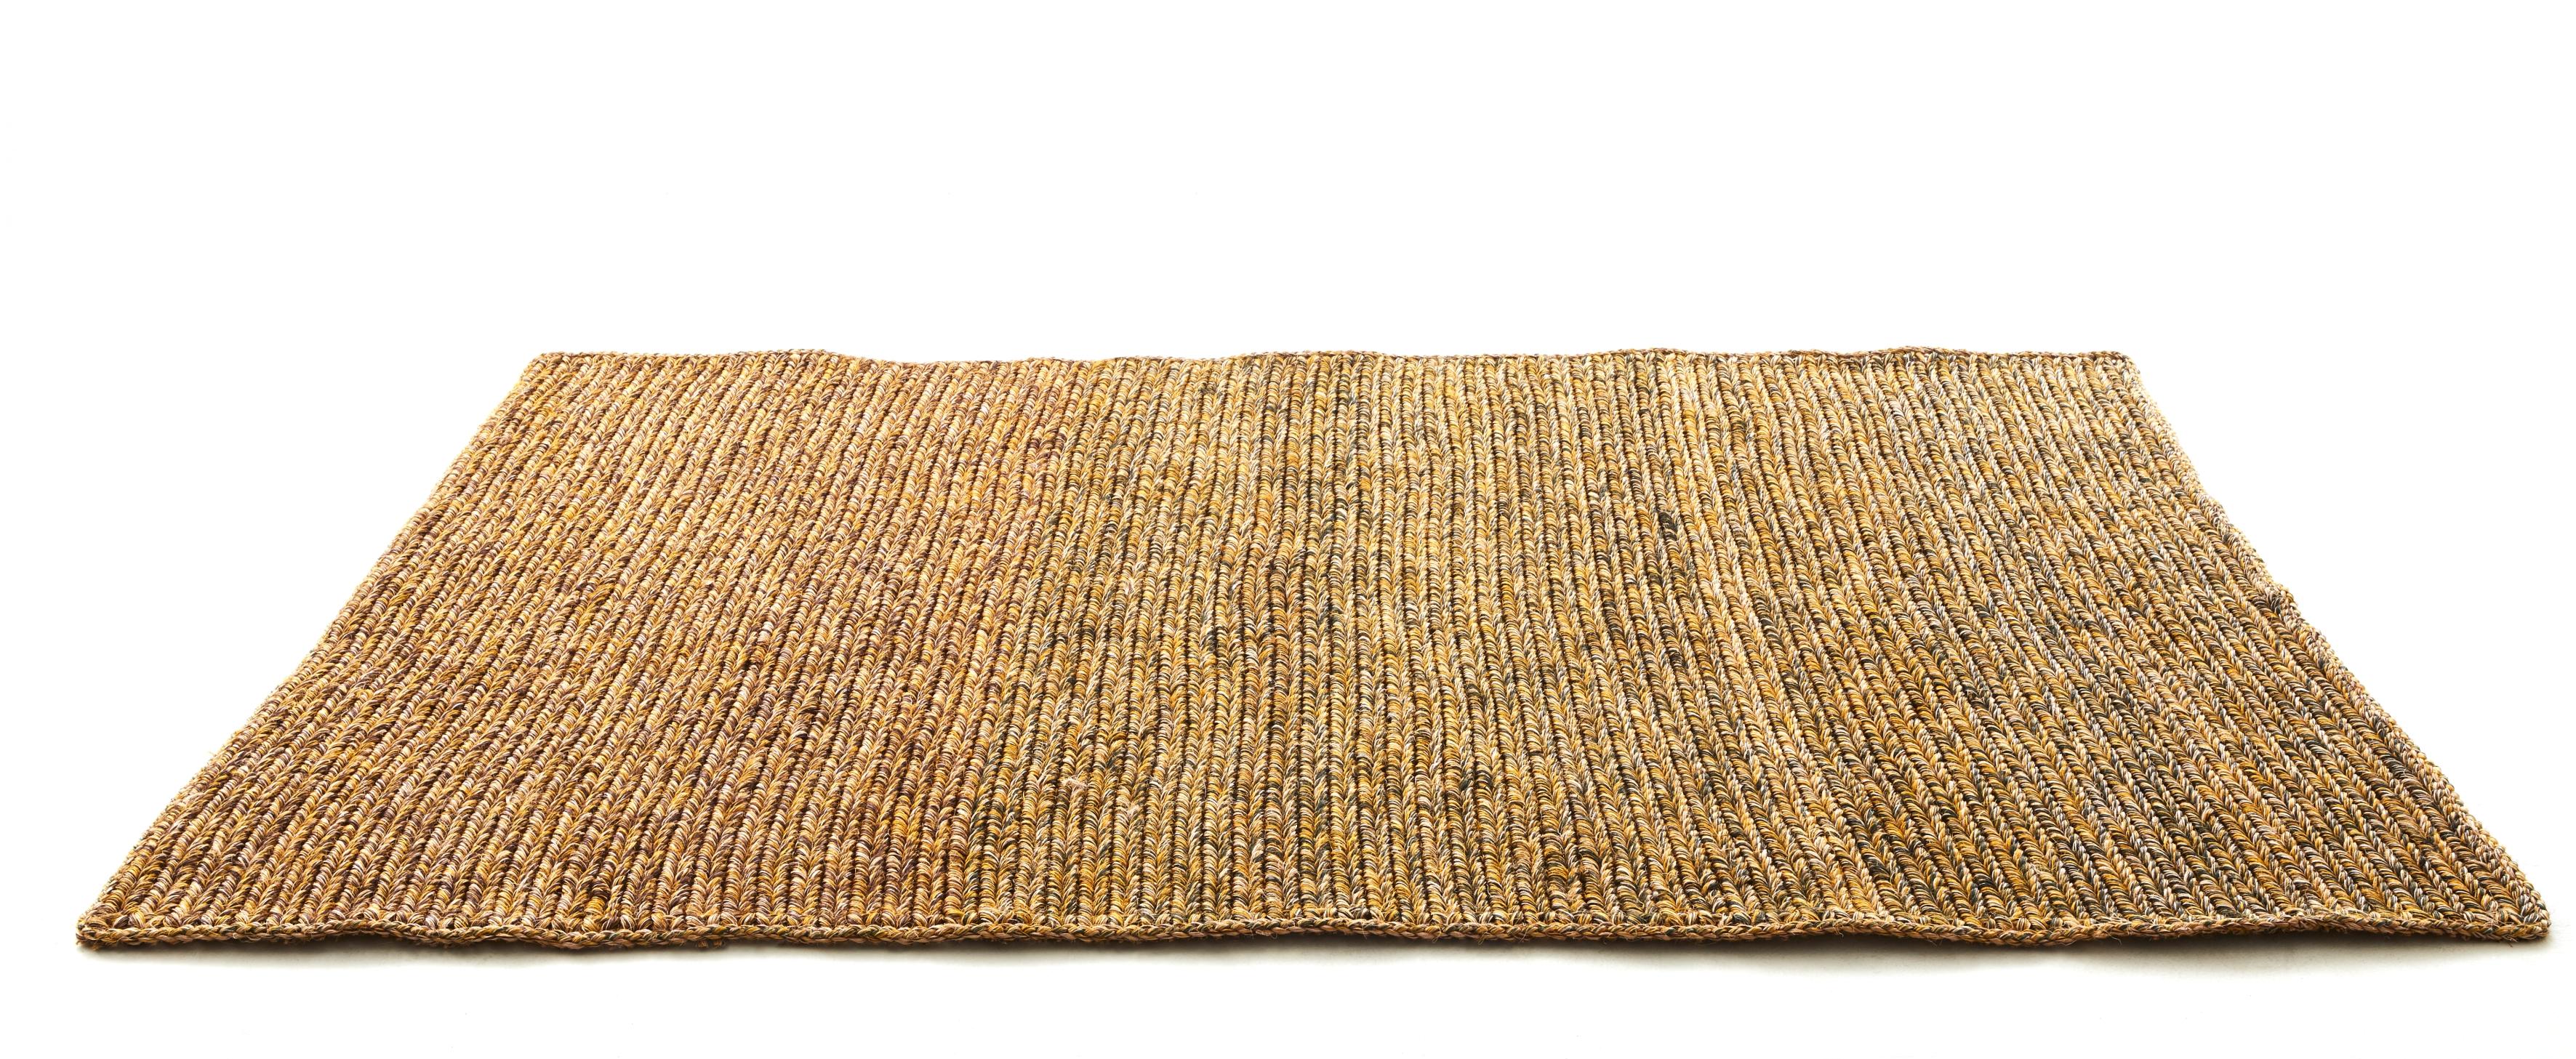 Medium par rug by Sebastian Herkner
Materials: Fibres from Jipi palm leaves fibers. 
Technique: Naturally dyed fibers. Hand-woven in Colombia.
Dimensions: W 200 x L 300 cm 
Available in colors: cacao melange/ brown melange, light grey melange/